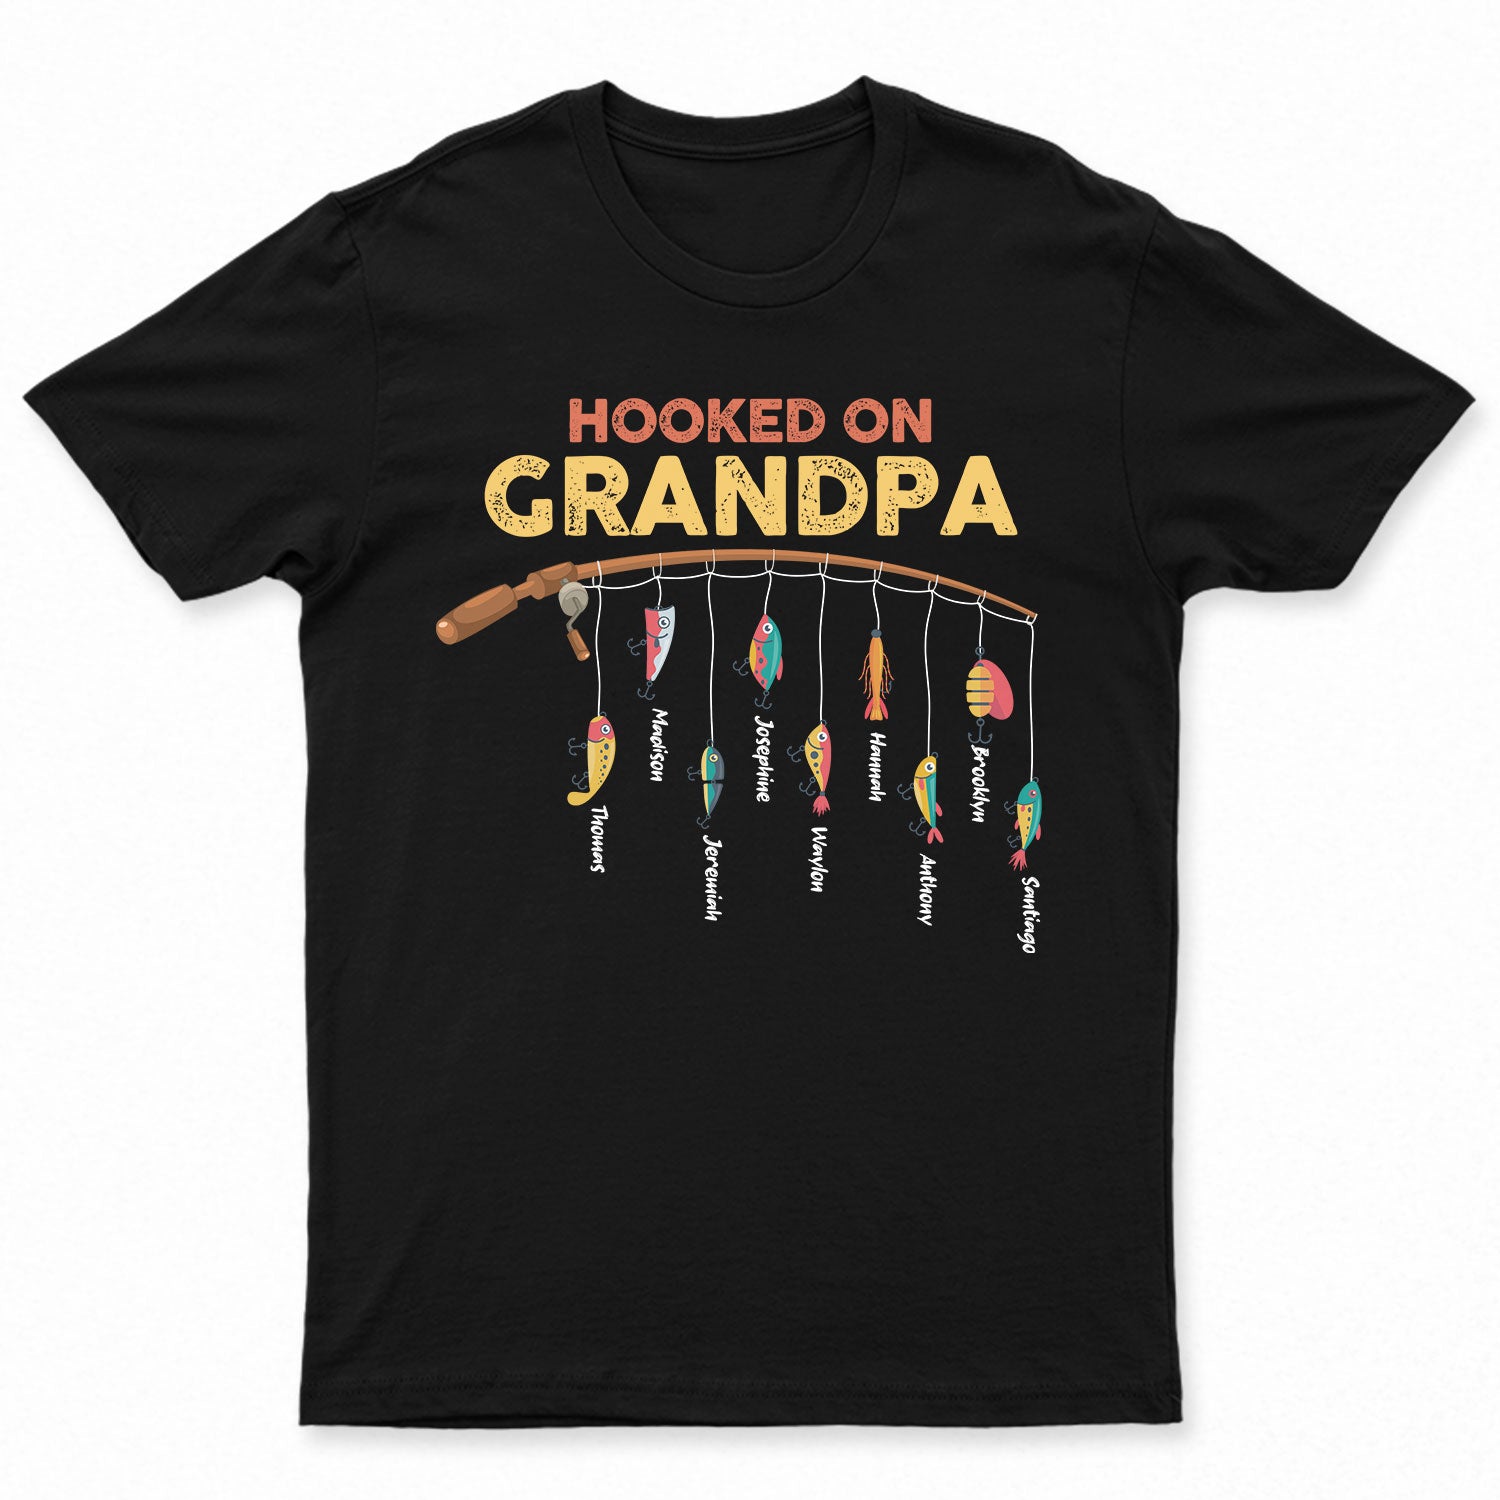 Fishing Hooked On Dad, Grandpa - Gift for Father, Grandfather - Personalized T Shirt T-Shirt / Tshirt Black / S